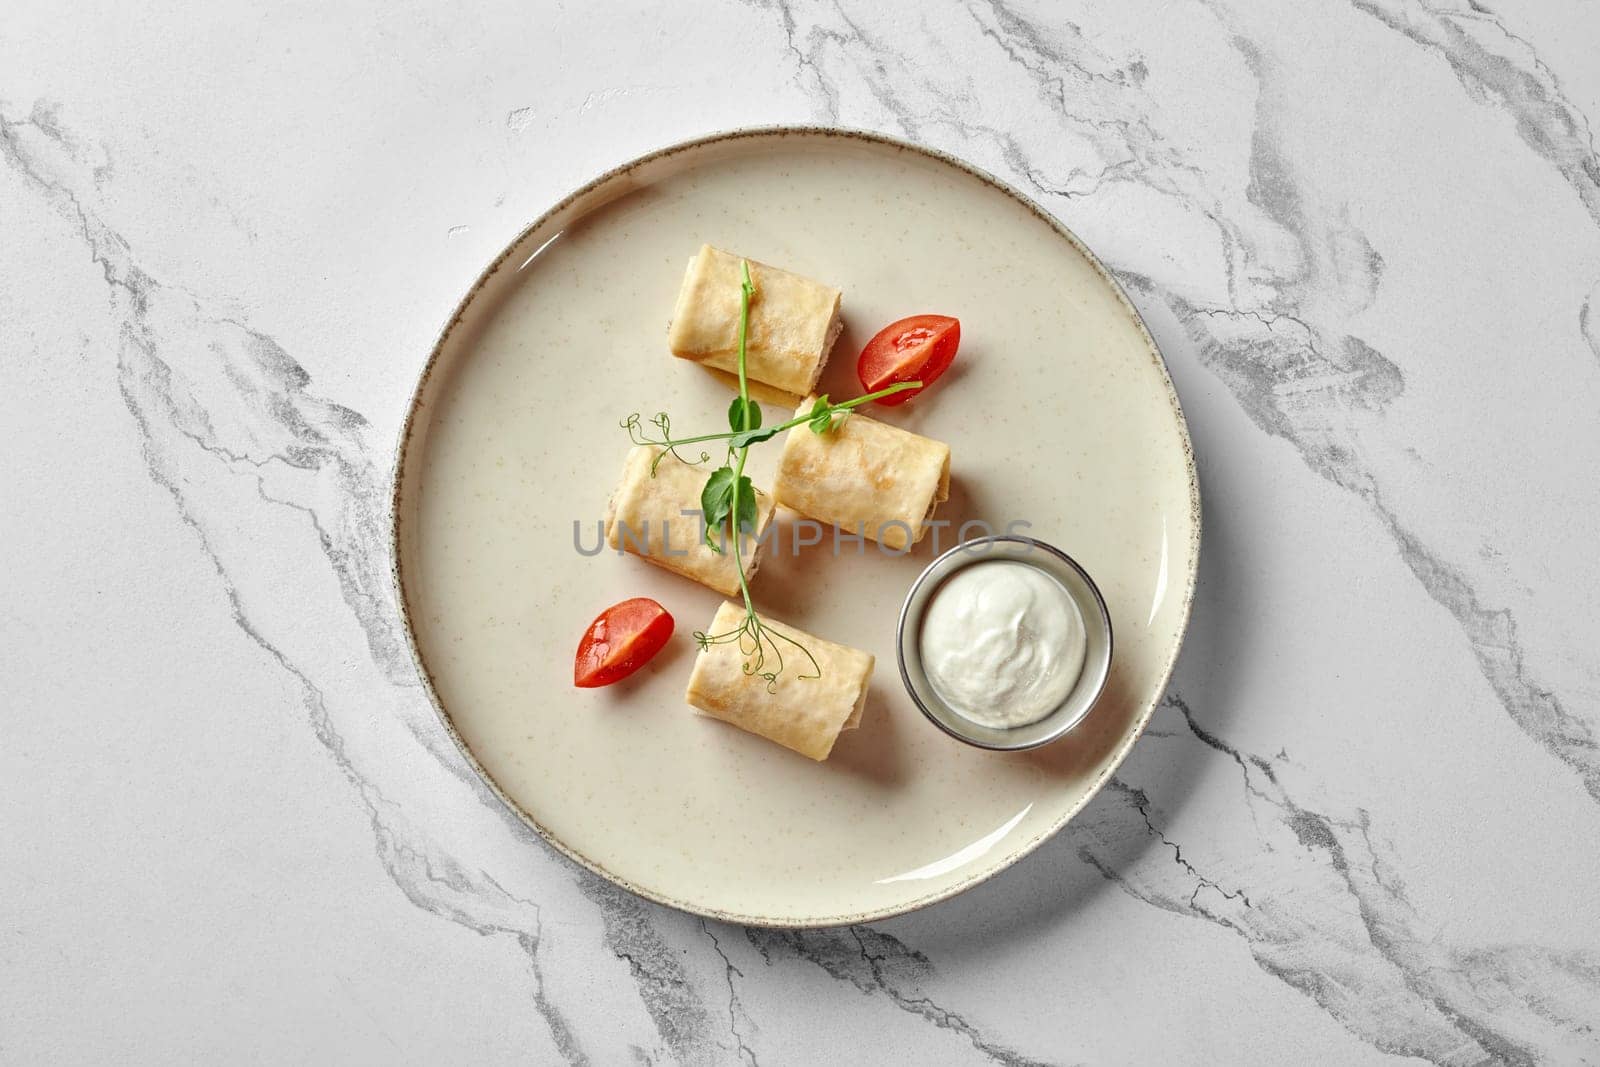 Top view of savory chicken stuffed crepe rolls garnished with fresh herbs and cherry tomato, served with creamy dipping sauce on ceramic plate against marble background